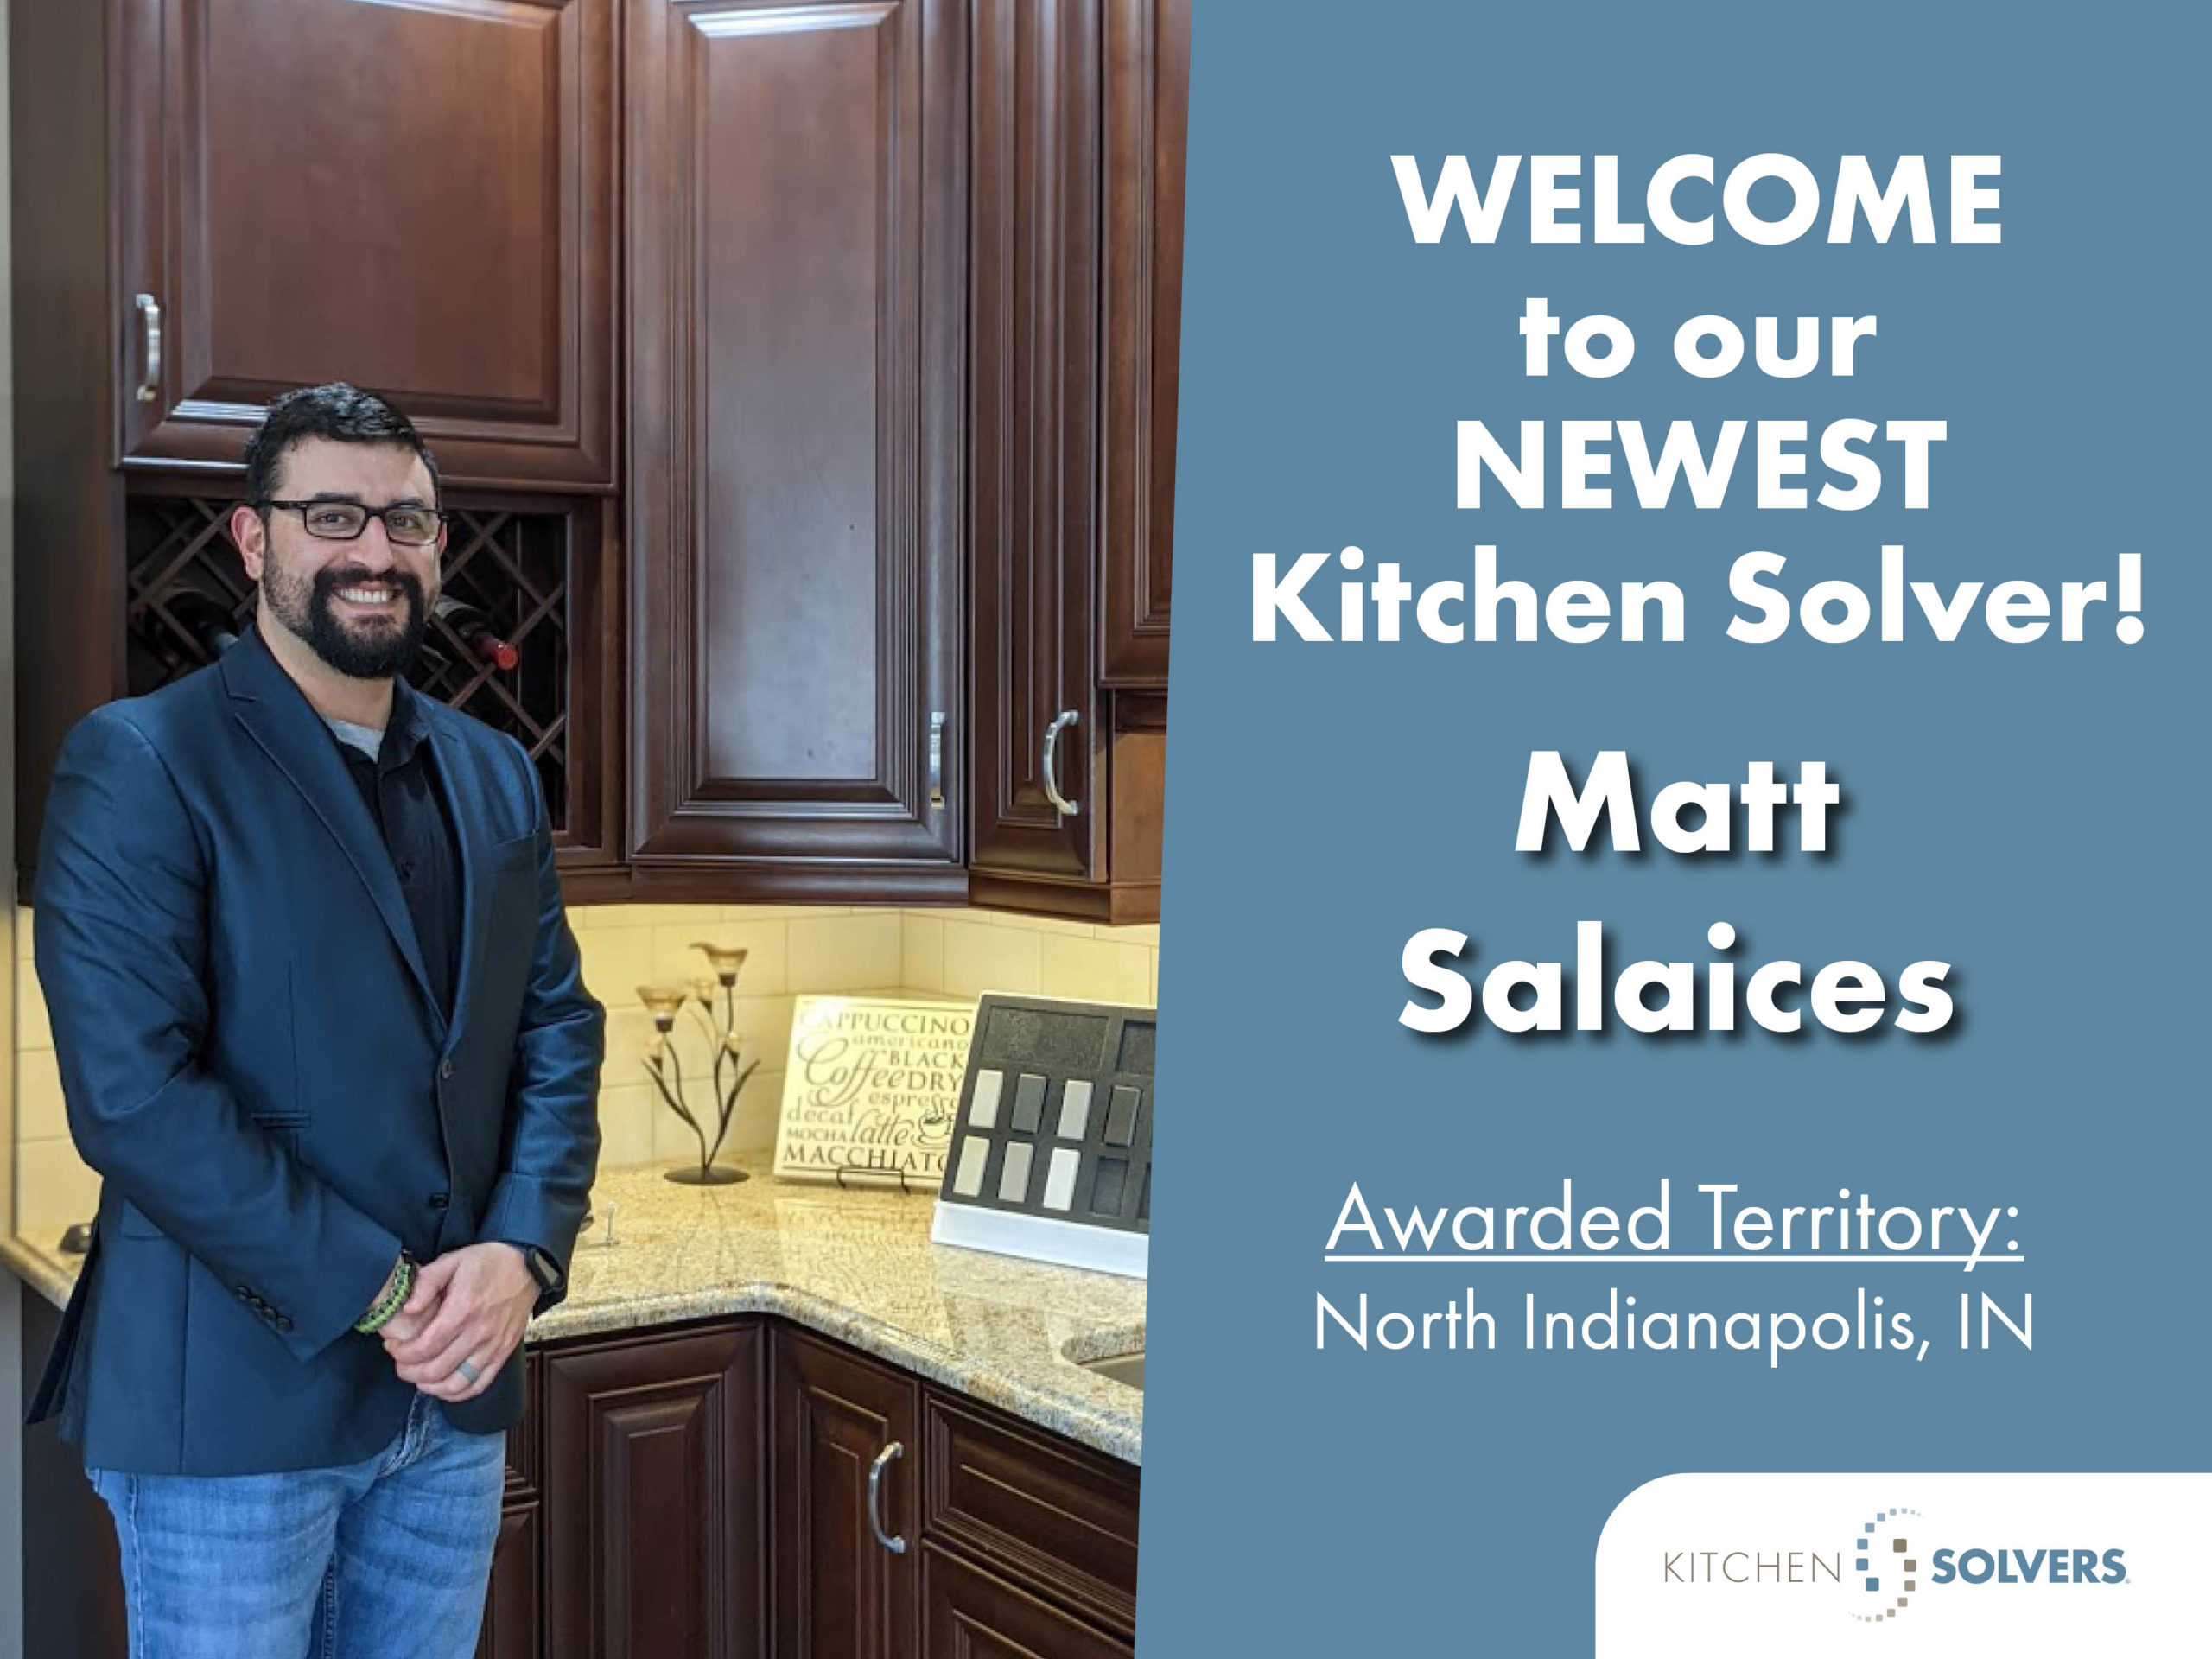 Matt Salaices Owner of Kitchen Solvers of North Indianapolis